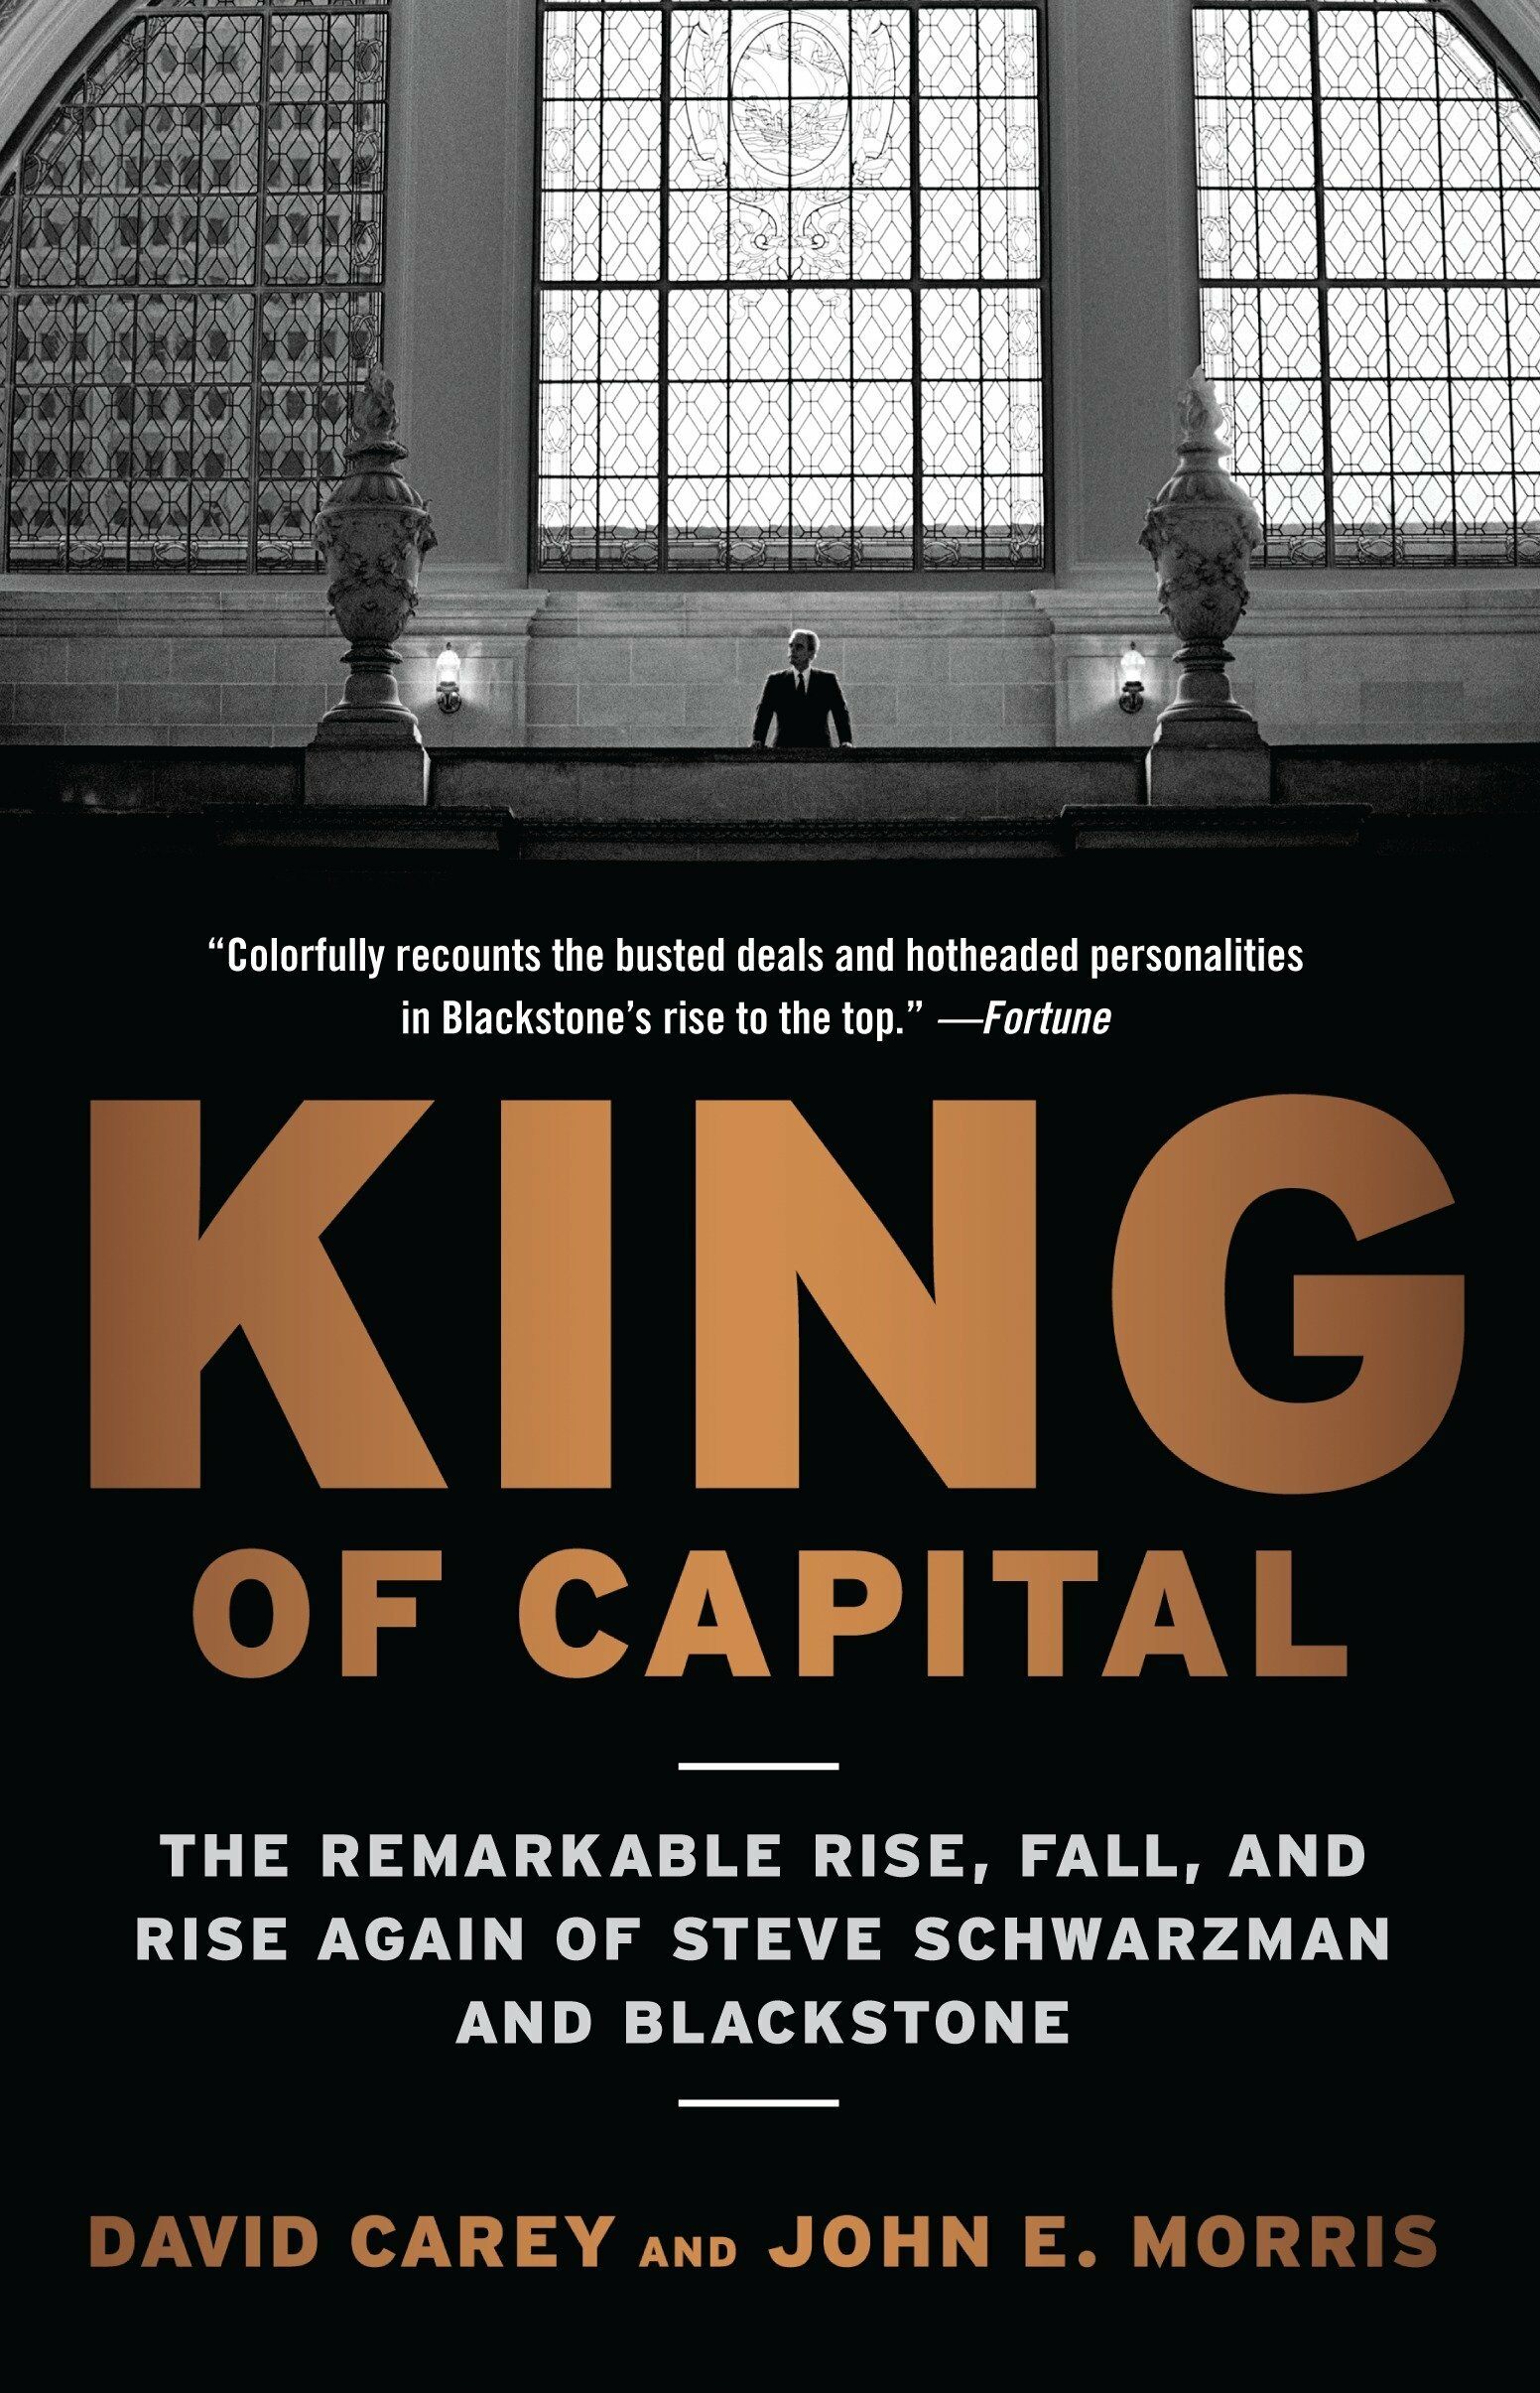 King of Capital: The Remarkable Rise, Fall, and Rise Again of Steve Schwarzman and Blackstone (Paperback)